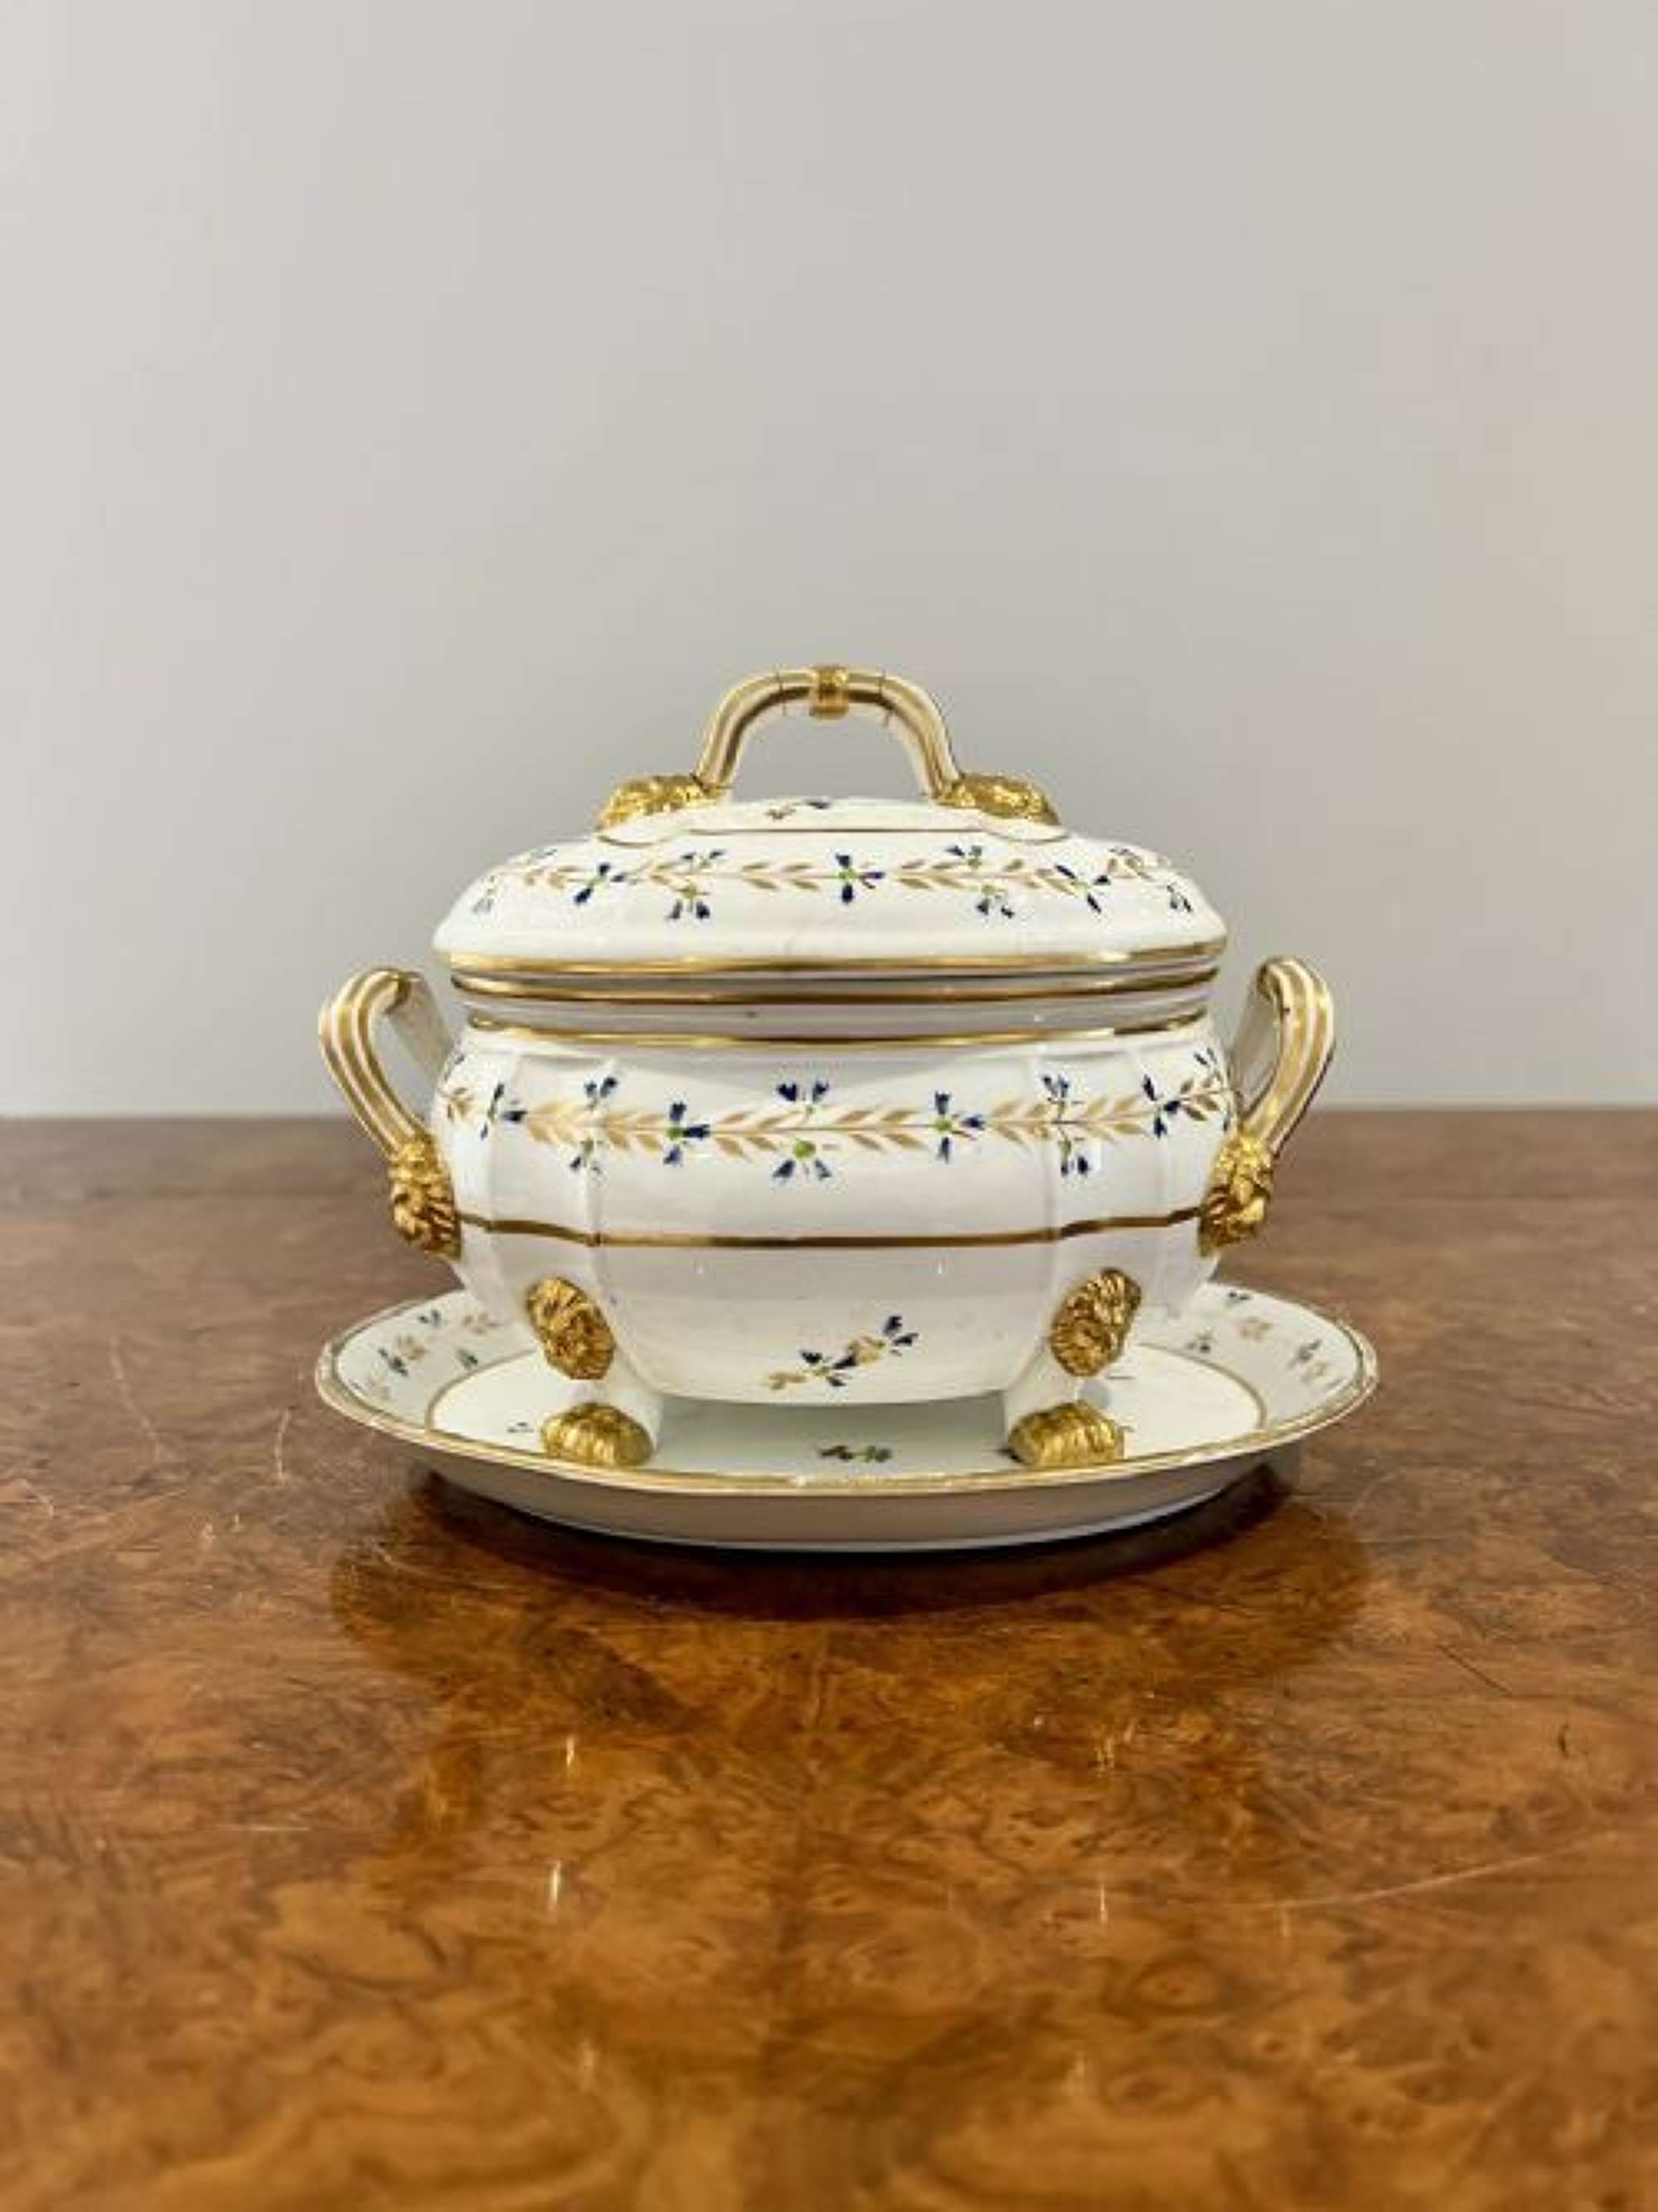 Outstanding Quality Early 19th Century Crown Derby Tureen And Cover